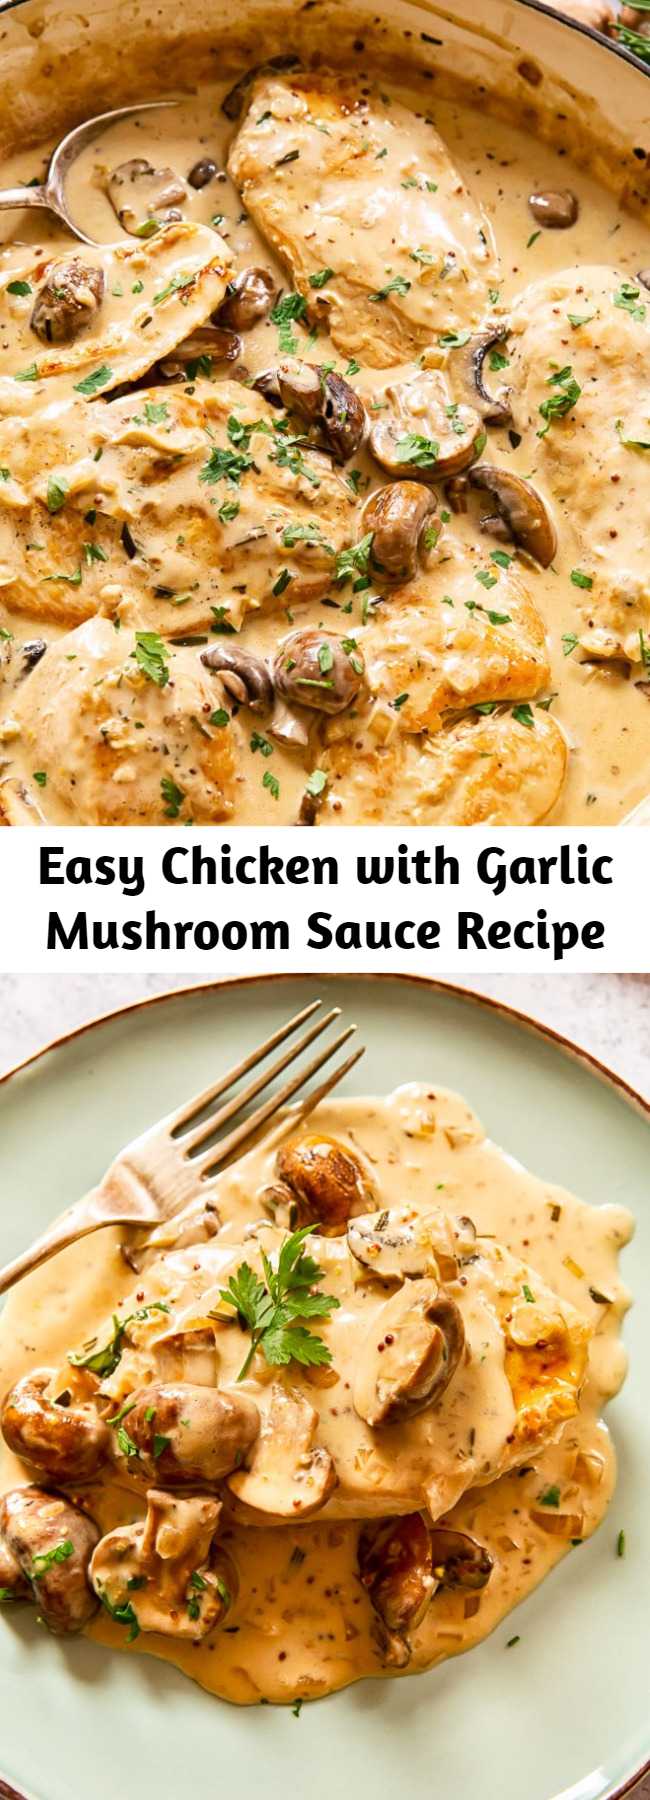 Easy Chicken with Garlic Mushroom Sauce Recipe - Tender and juicy chicken breasts smothered in garlic mushroom sauce is comfort food that could be in front of you in just 30 minutes! Using simple ingredients and cooking techniques you you can easily impress your loved one with this restaurant quality dinner!